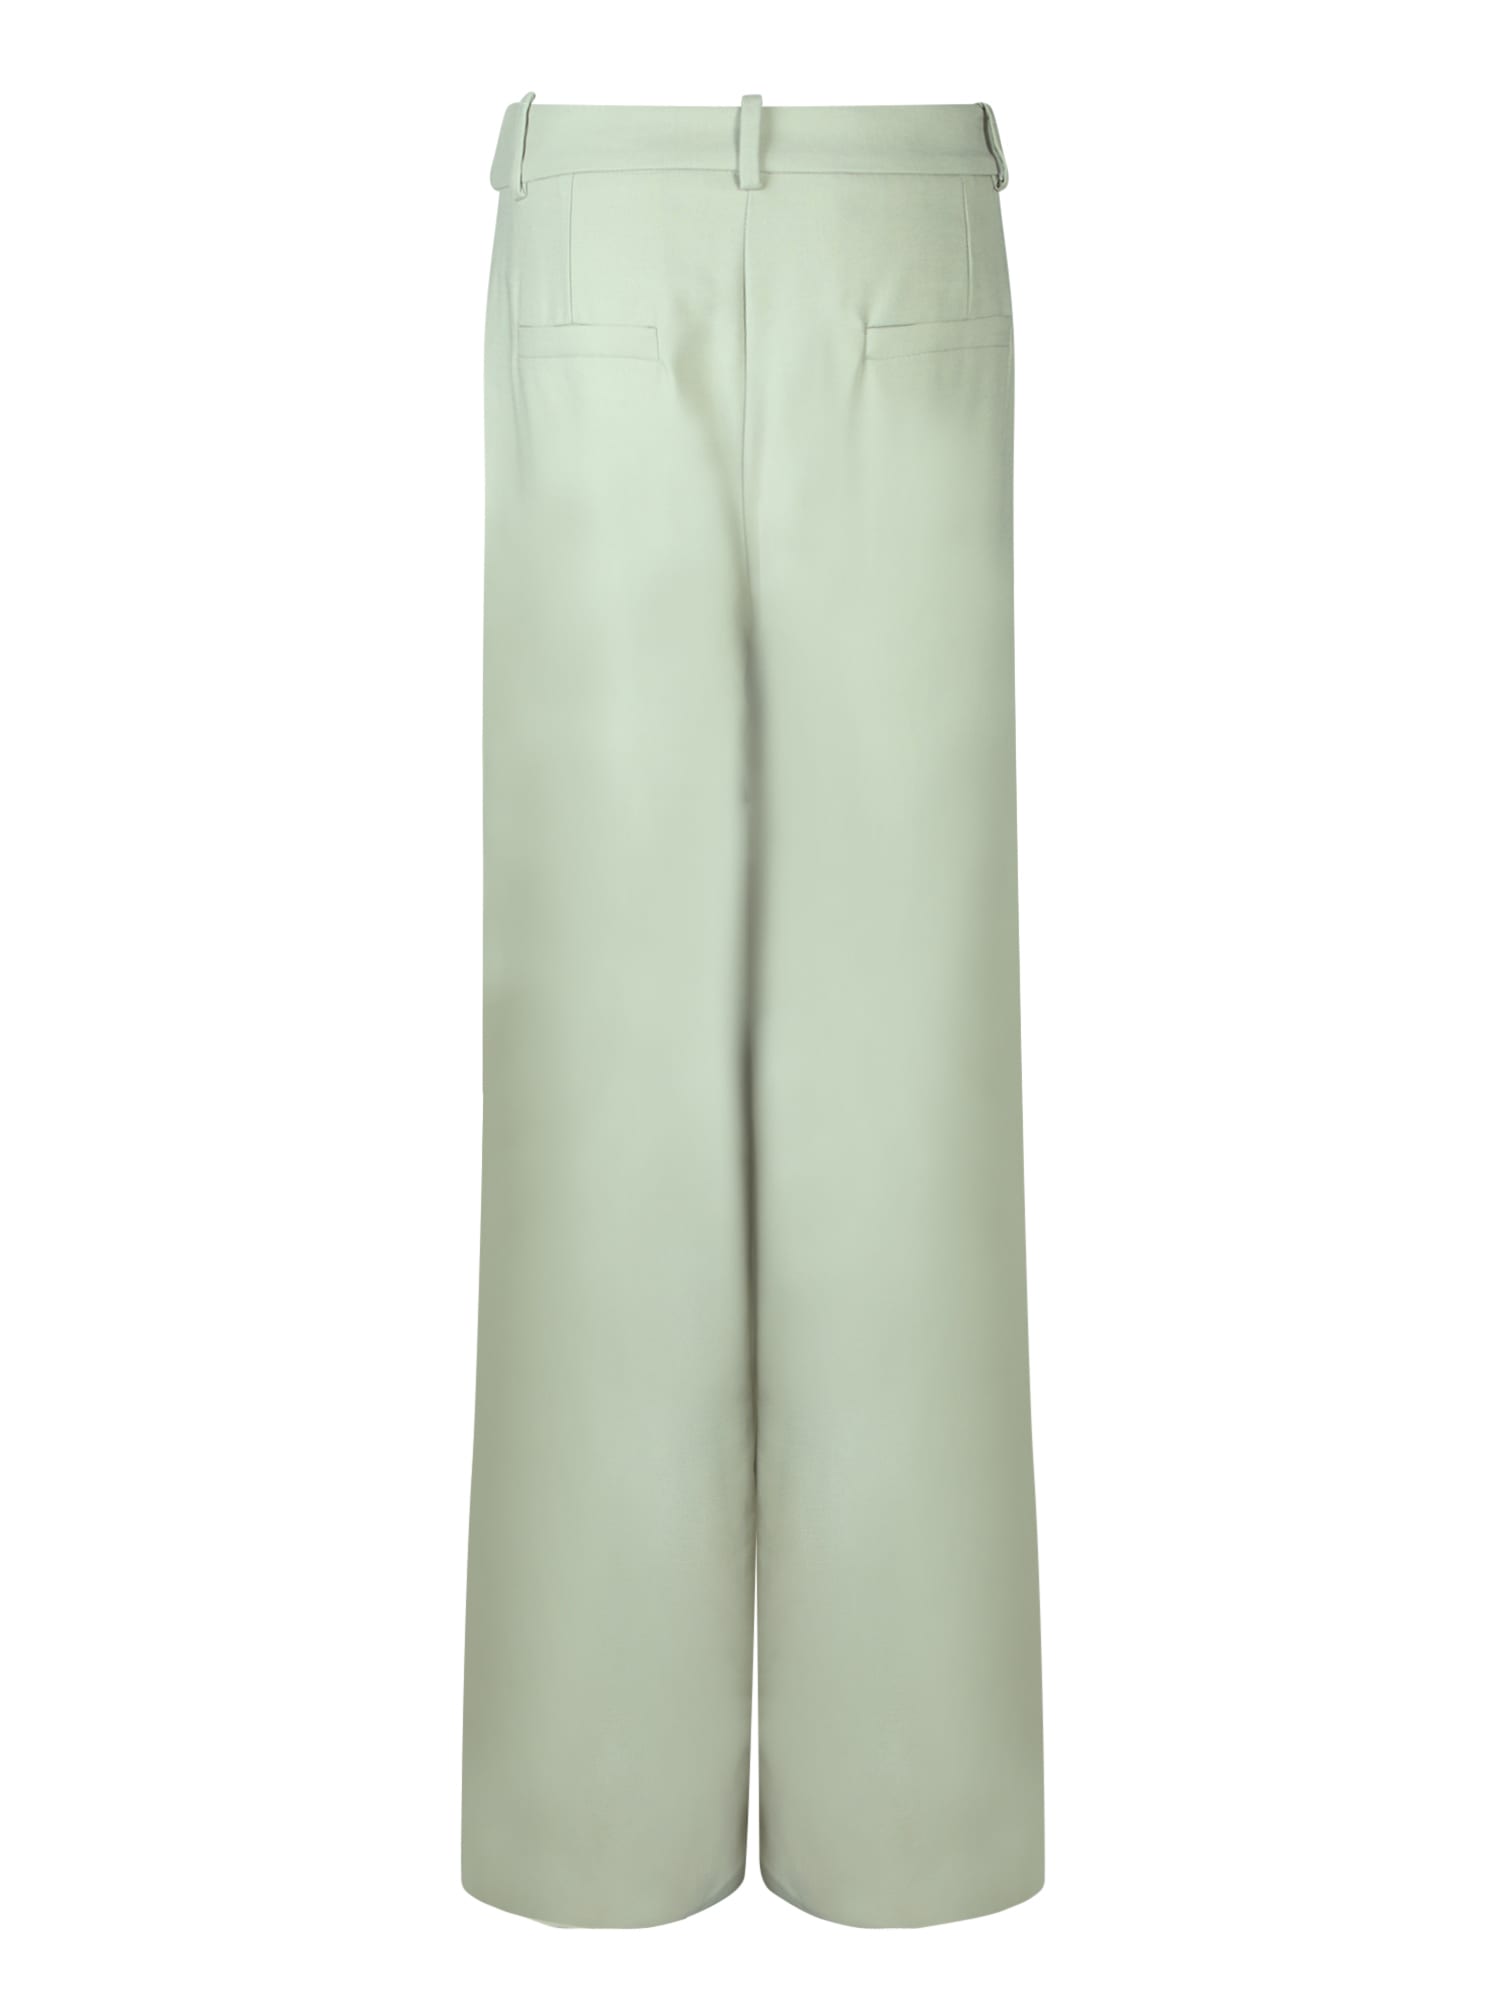 Shop Federica Tosi Sage Green Tailored Trousers